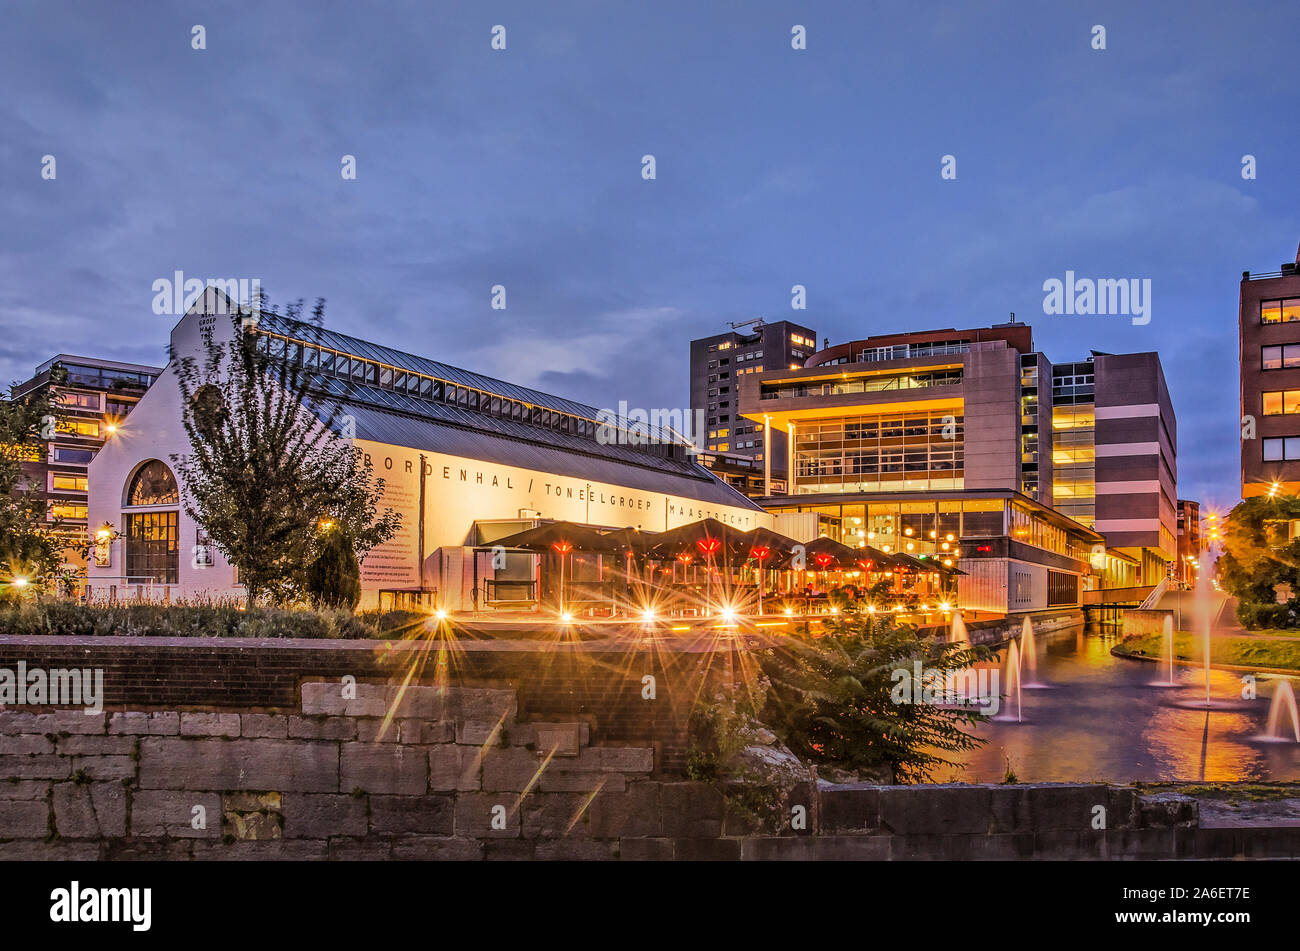 Maastricht, The Netherlands, september 7, 2019: blue hour view of the Bordenhal, a former crockery factory building now in use as a theatre and cafe Stock Photo